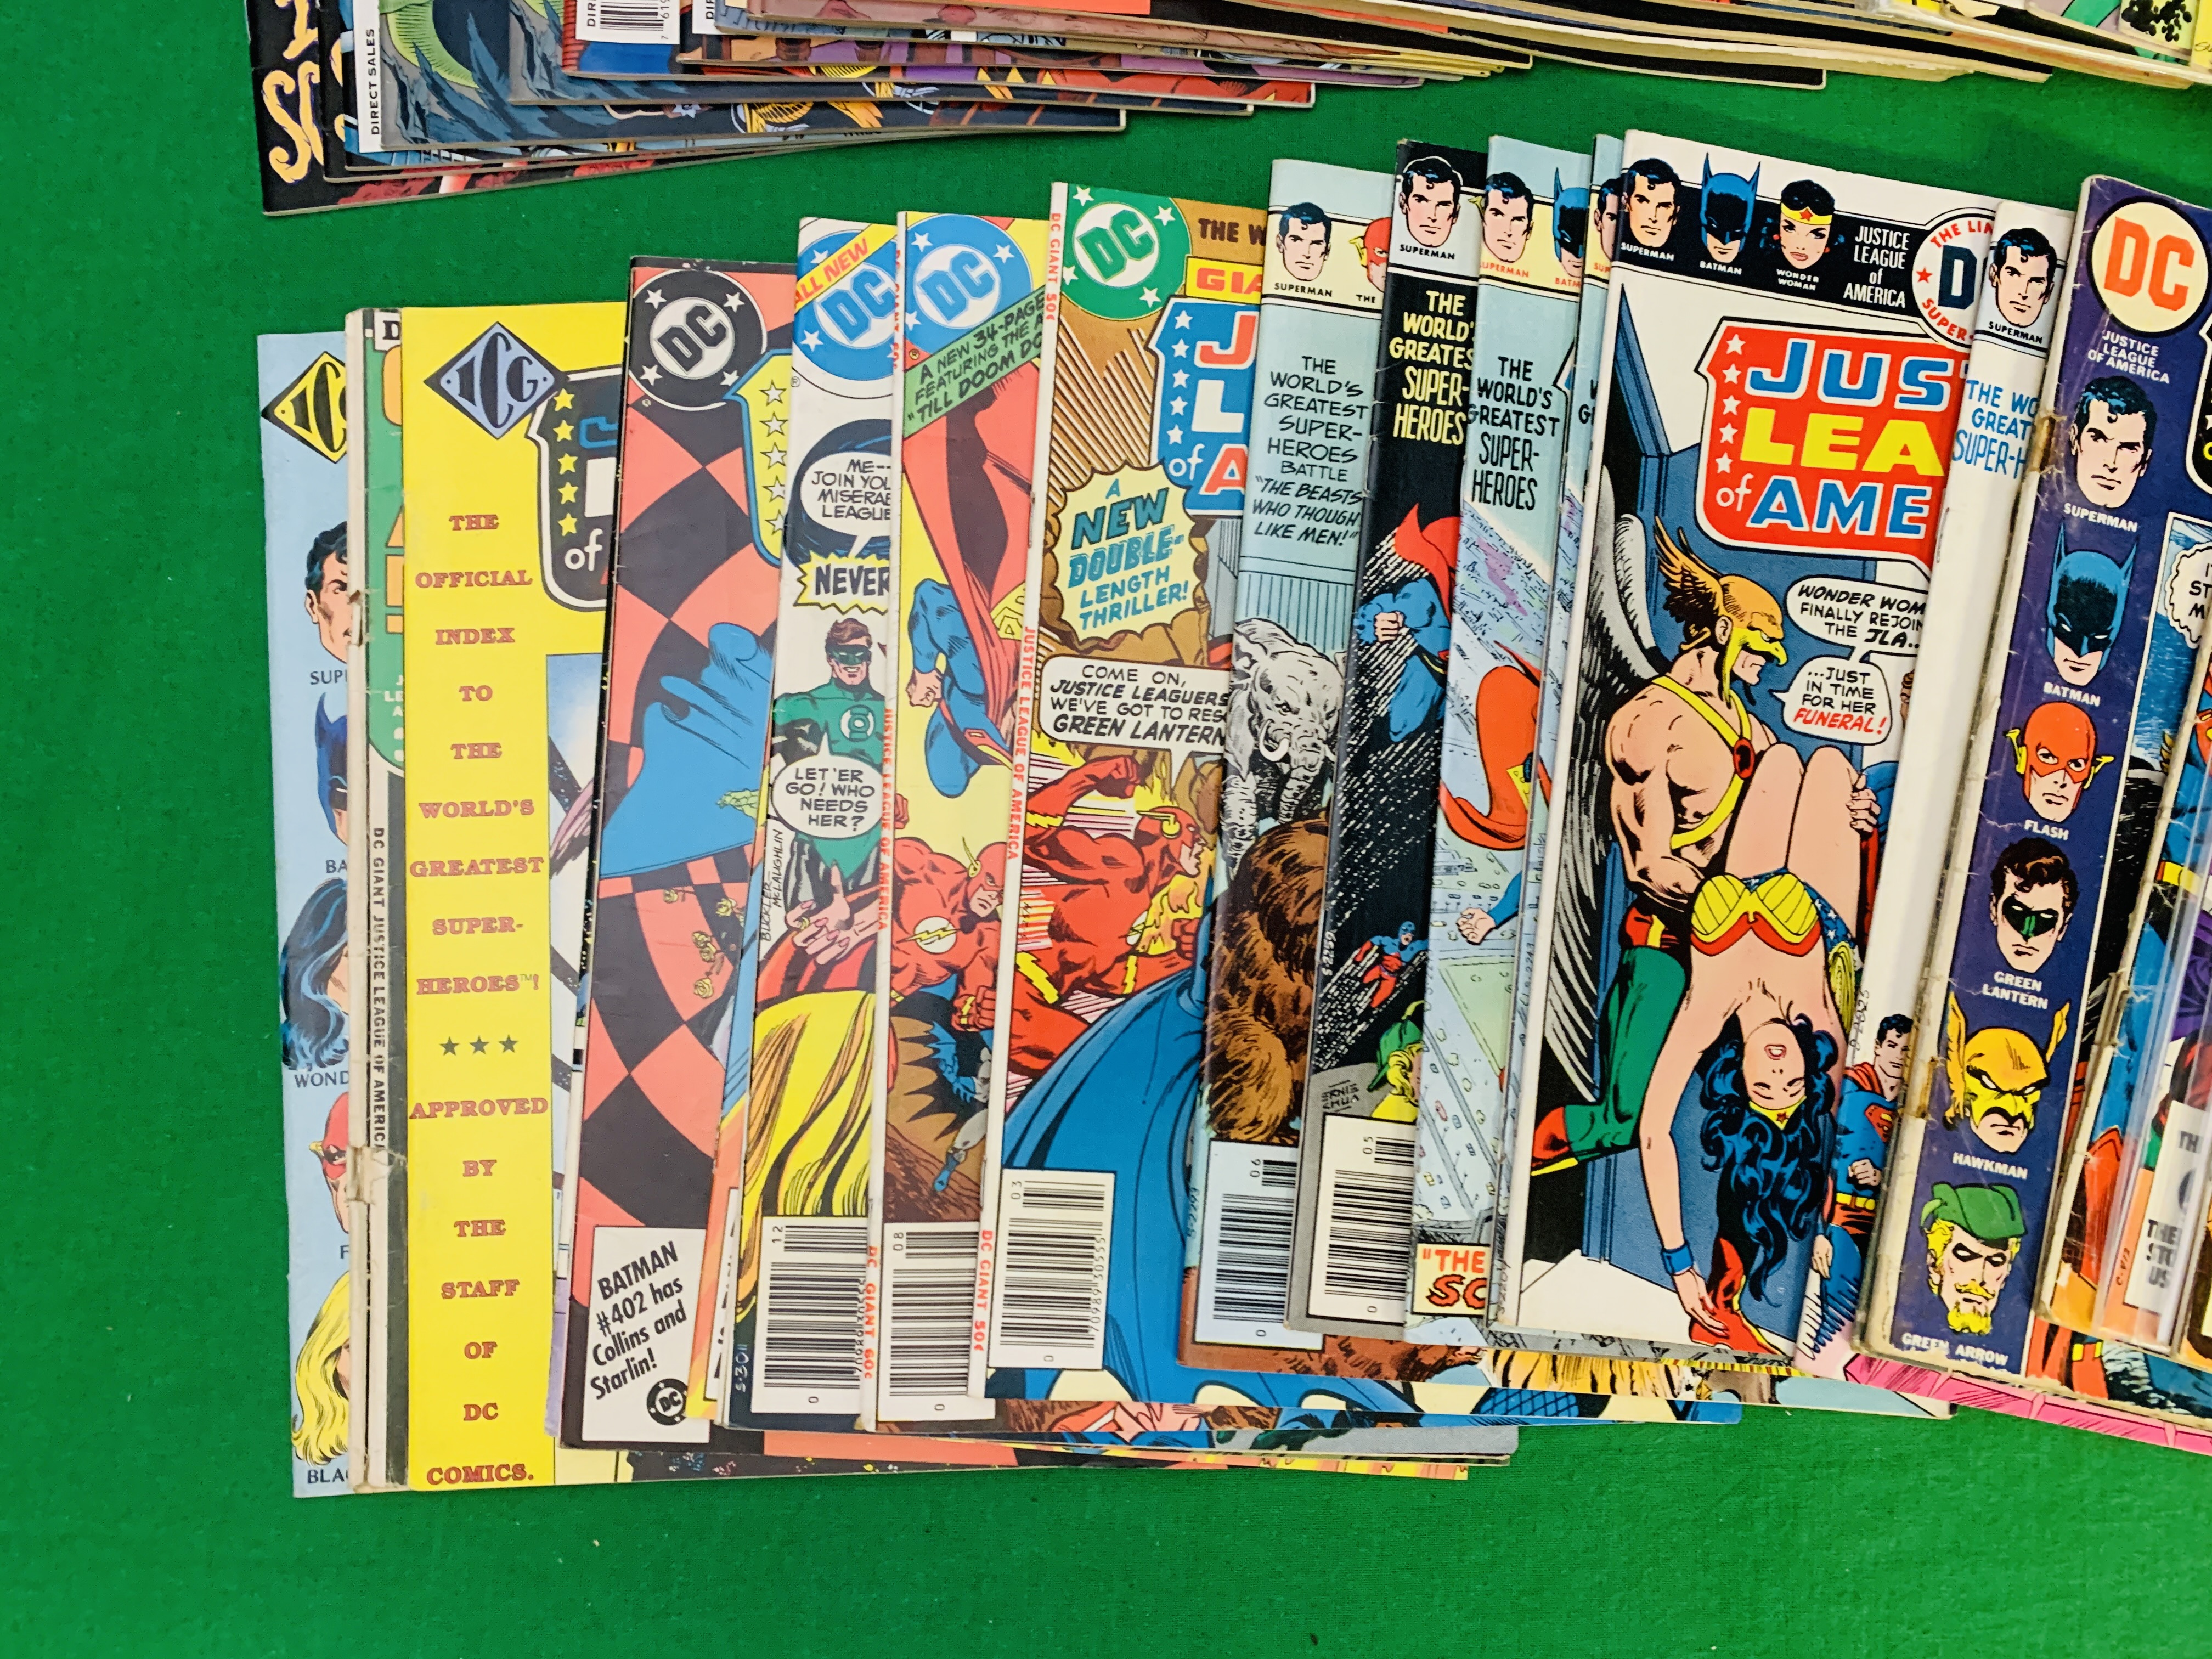 COLLECTION OF DC COMICS JUSTICE LEAGUE OF AMERICA INCLUDING EARLY ISSUES OF JLA. - Image 3 of 10